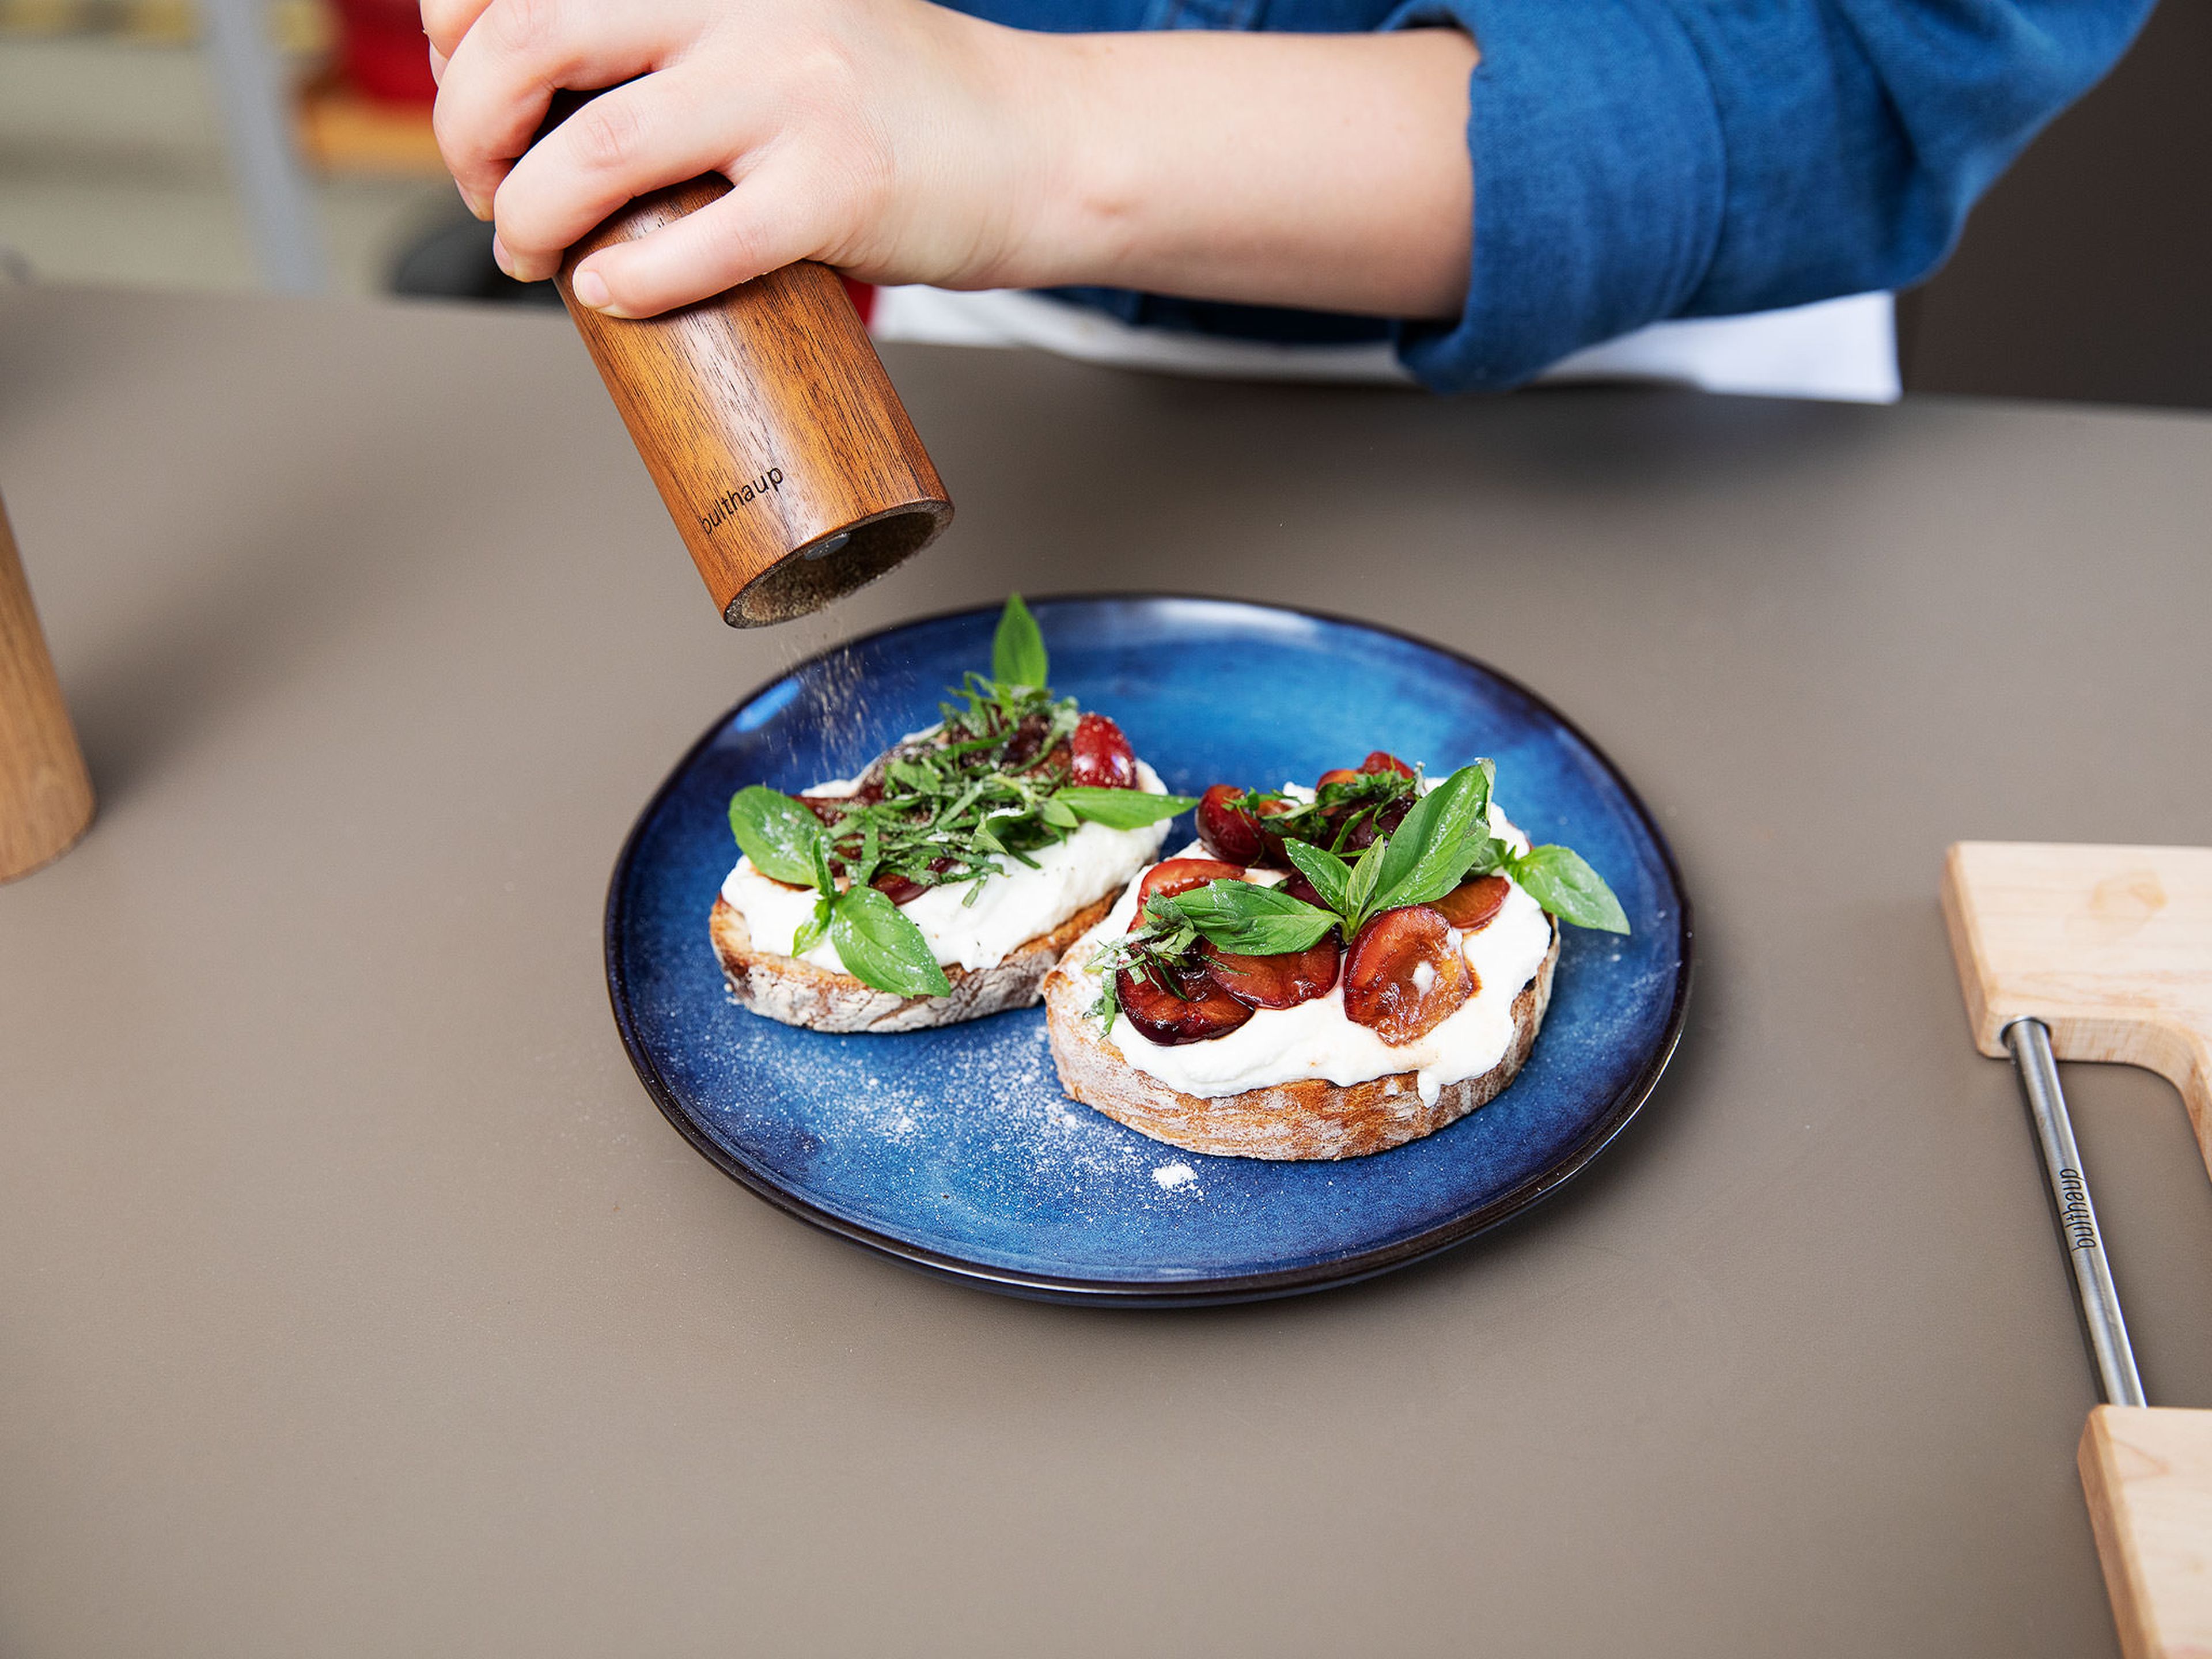 Heat a grill pan over medium-high heat and toast bread slices on both sides until light brown. For serving, spread the toasted bread with some of the whipped ricotta, top with balsamic cherries, and sprinkle with any remaining sauce. Garnish with sliced basil and enjoy!